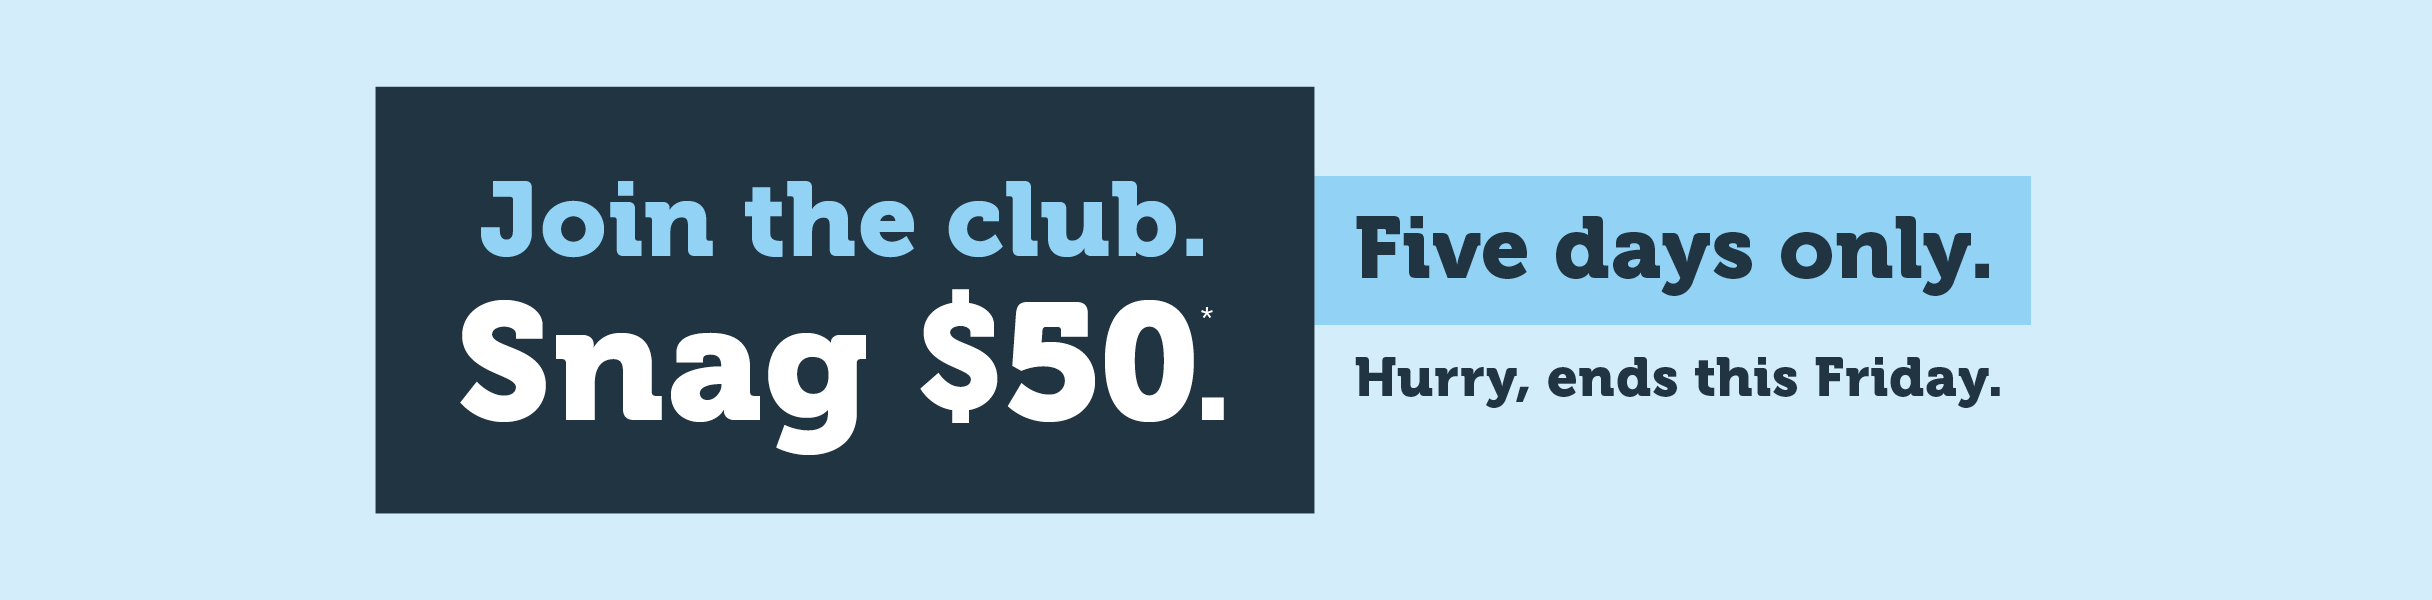 Join the club. Snag $50.